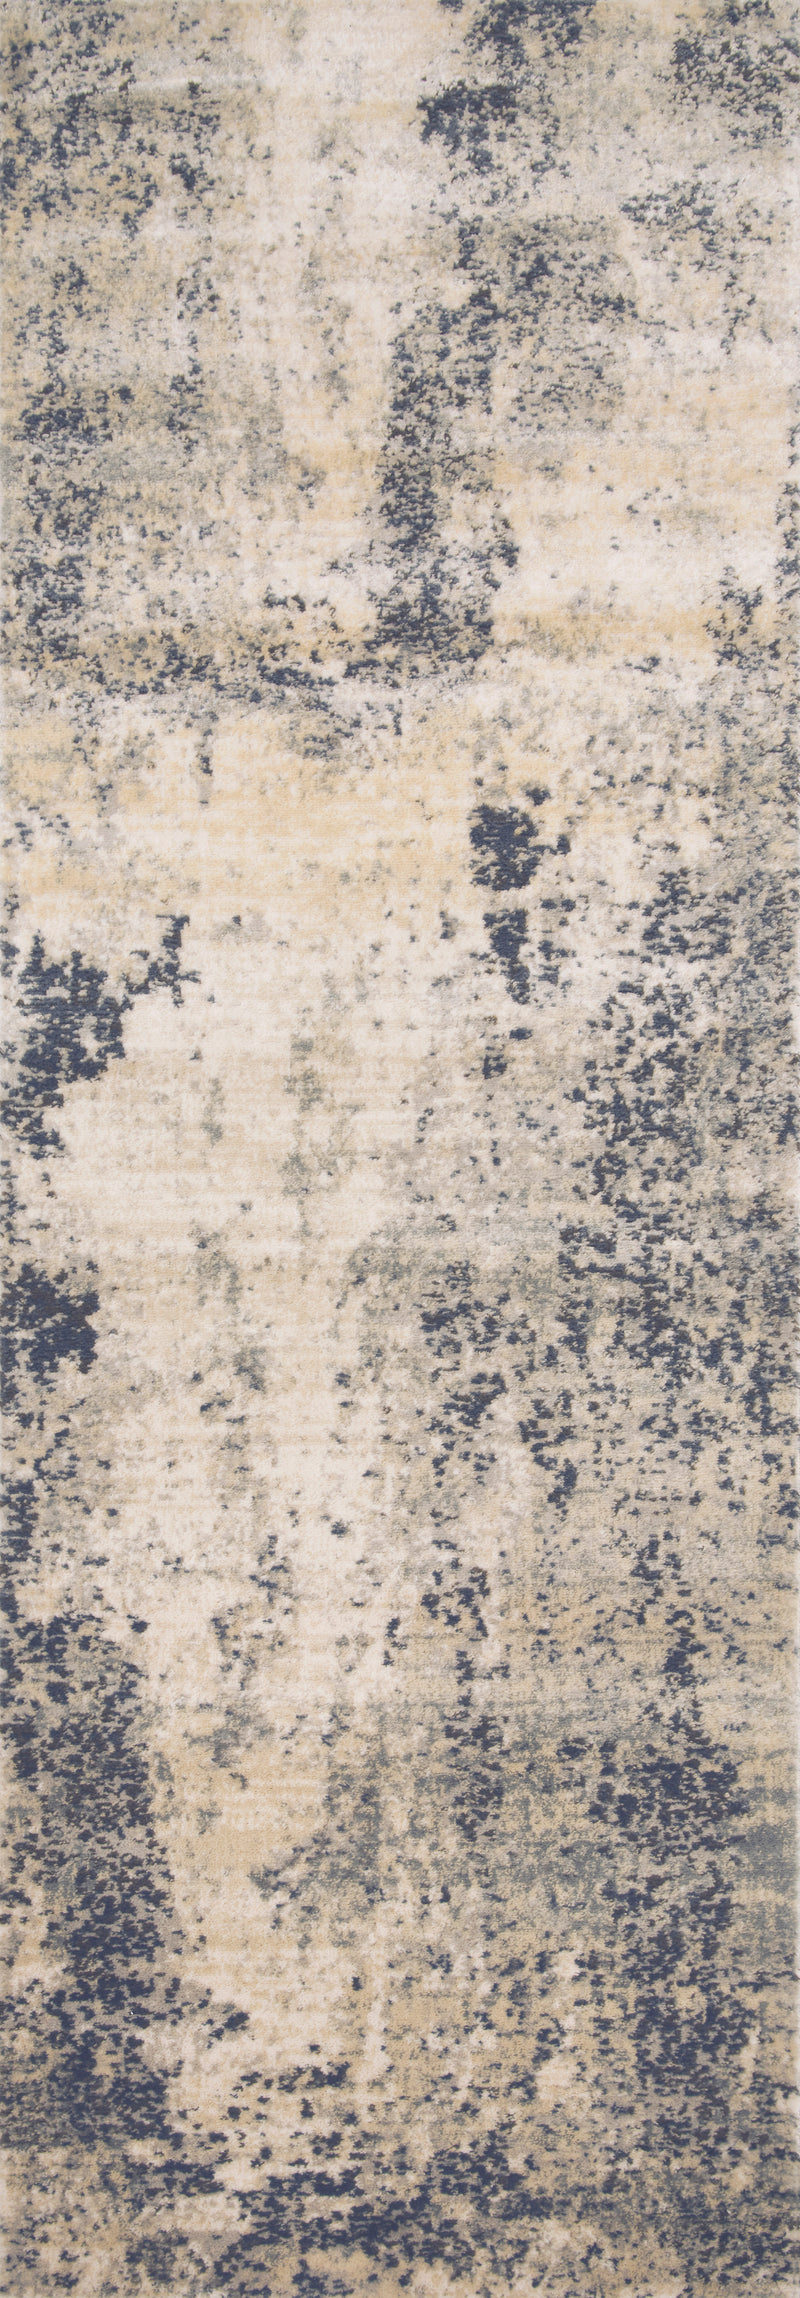 media image for Teagan Rug in Natural / Denim by Loloi II 281